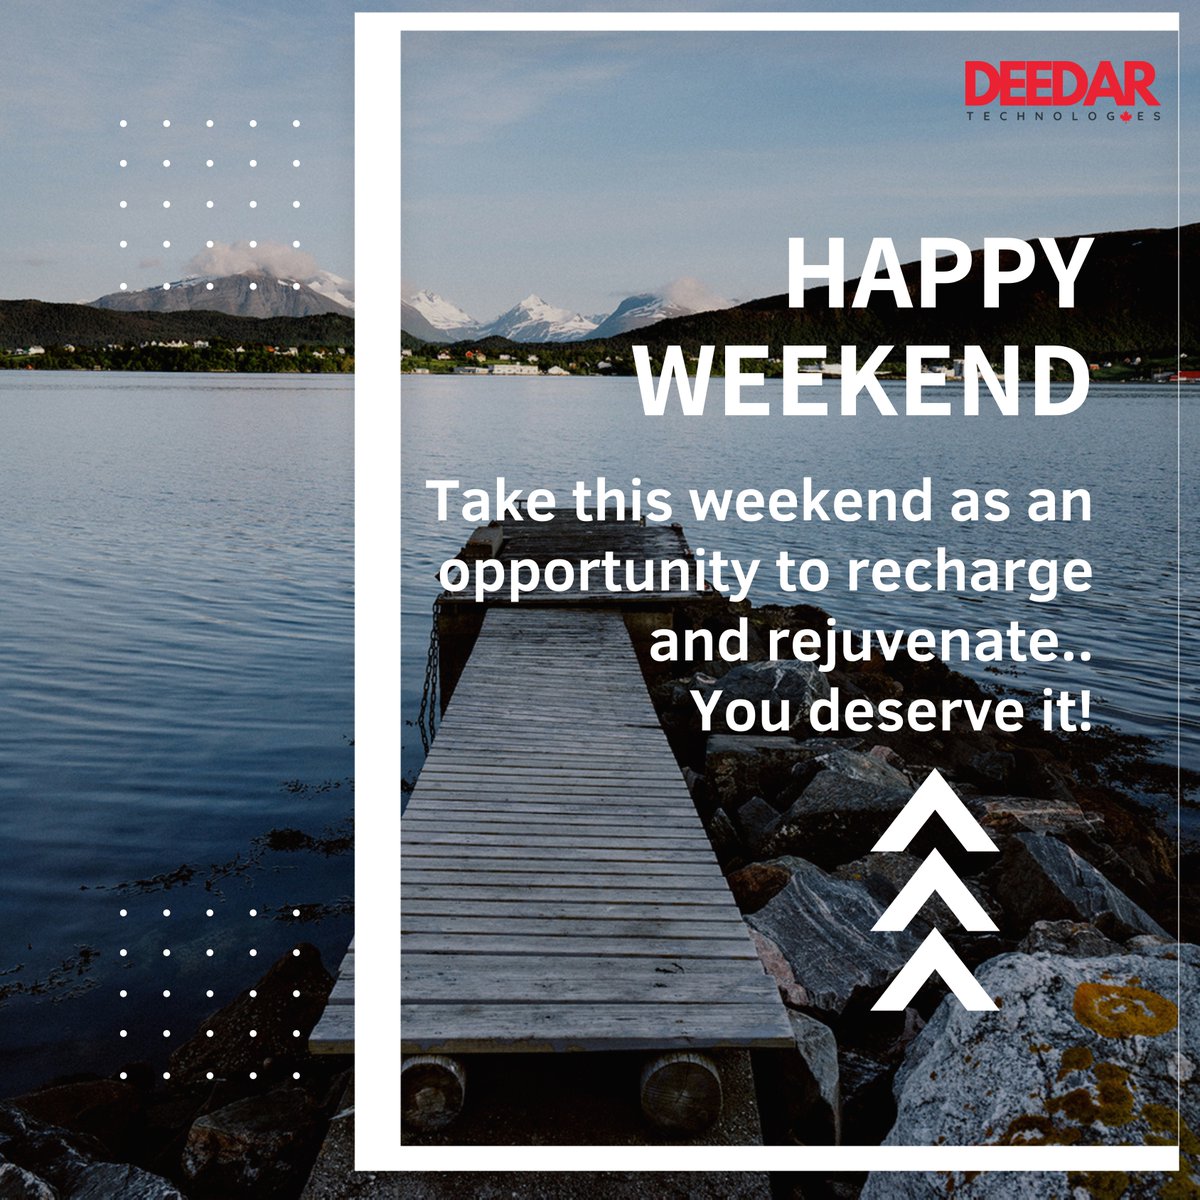 Take advantage of this weekend to refresh and revitalize. Treat yourself to some well-deserved rest and relaxation. You've earned it!

#DeedarTechnologies #DigitalMarketing #WeekendVibes #MentalHealthManagement #HappyWeekend #MentalHealthAwareness